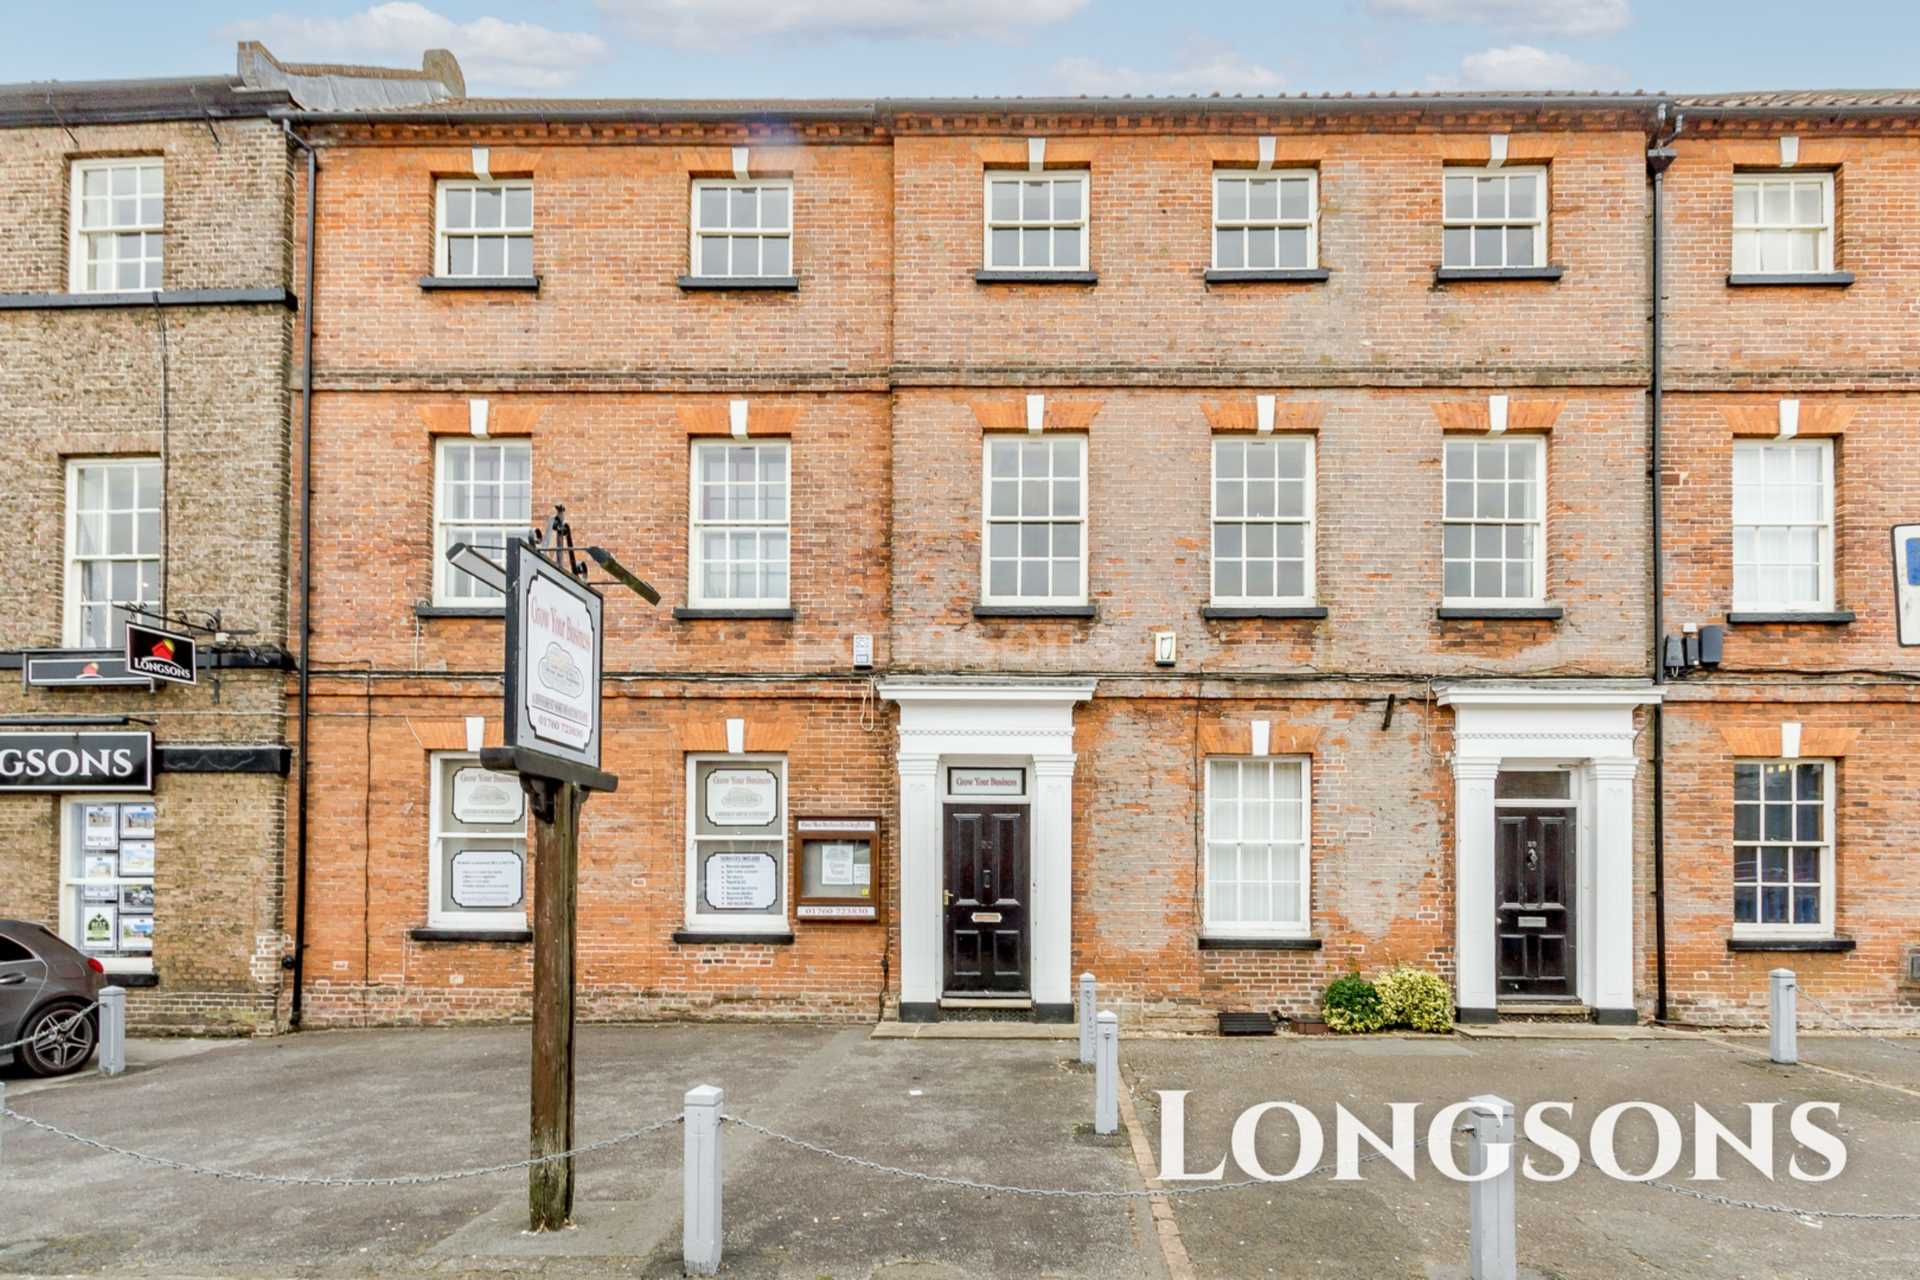 0 bed Office for rent in Swaffham. From Longsons - Swaffham